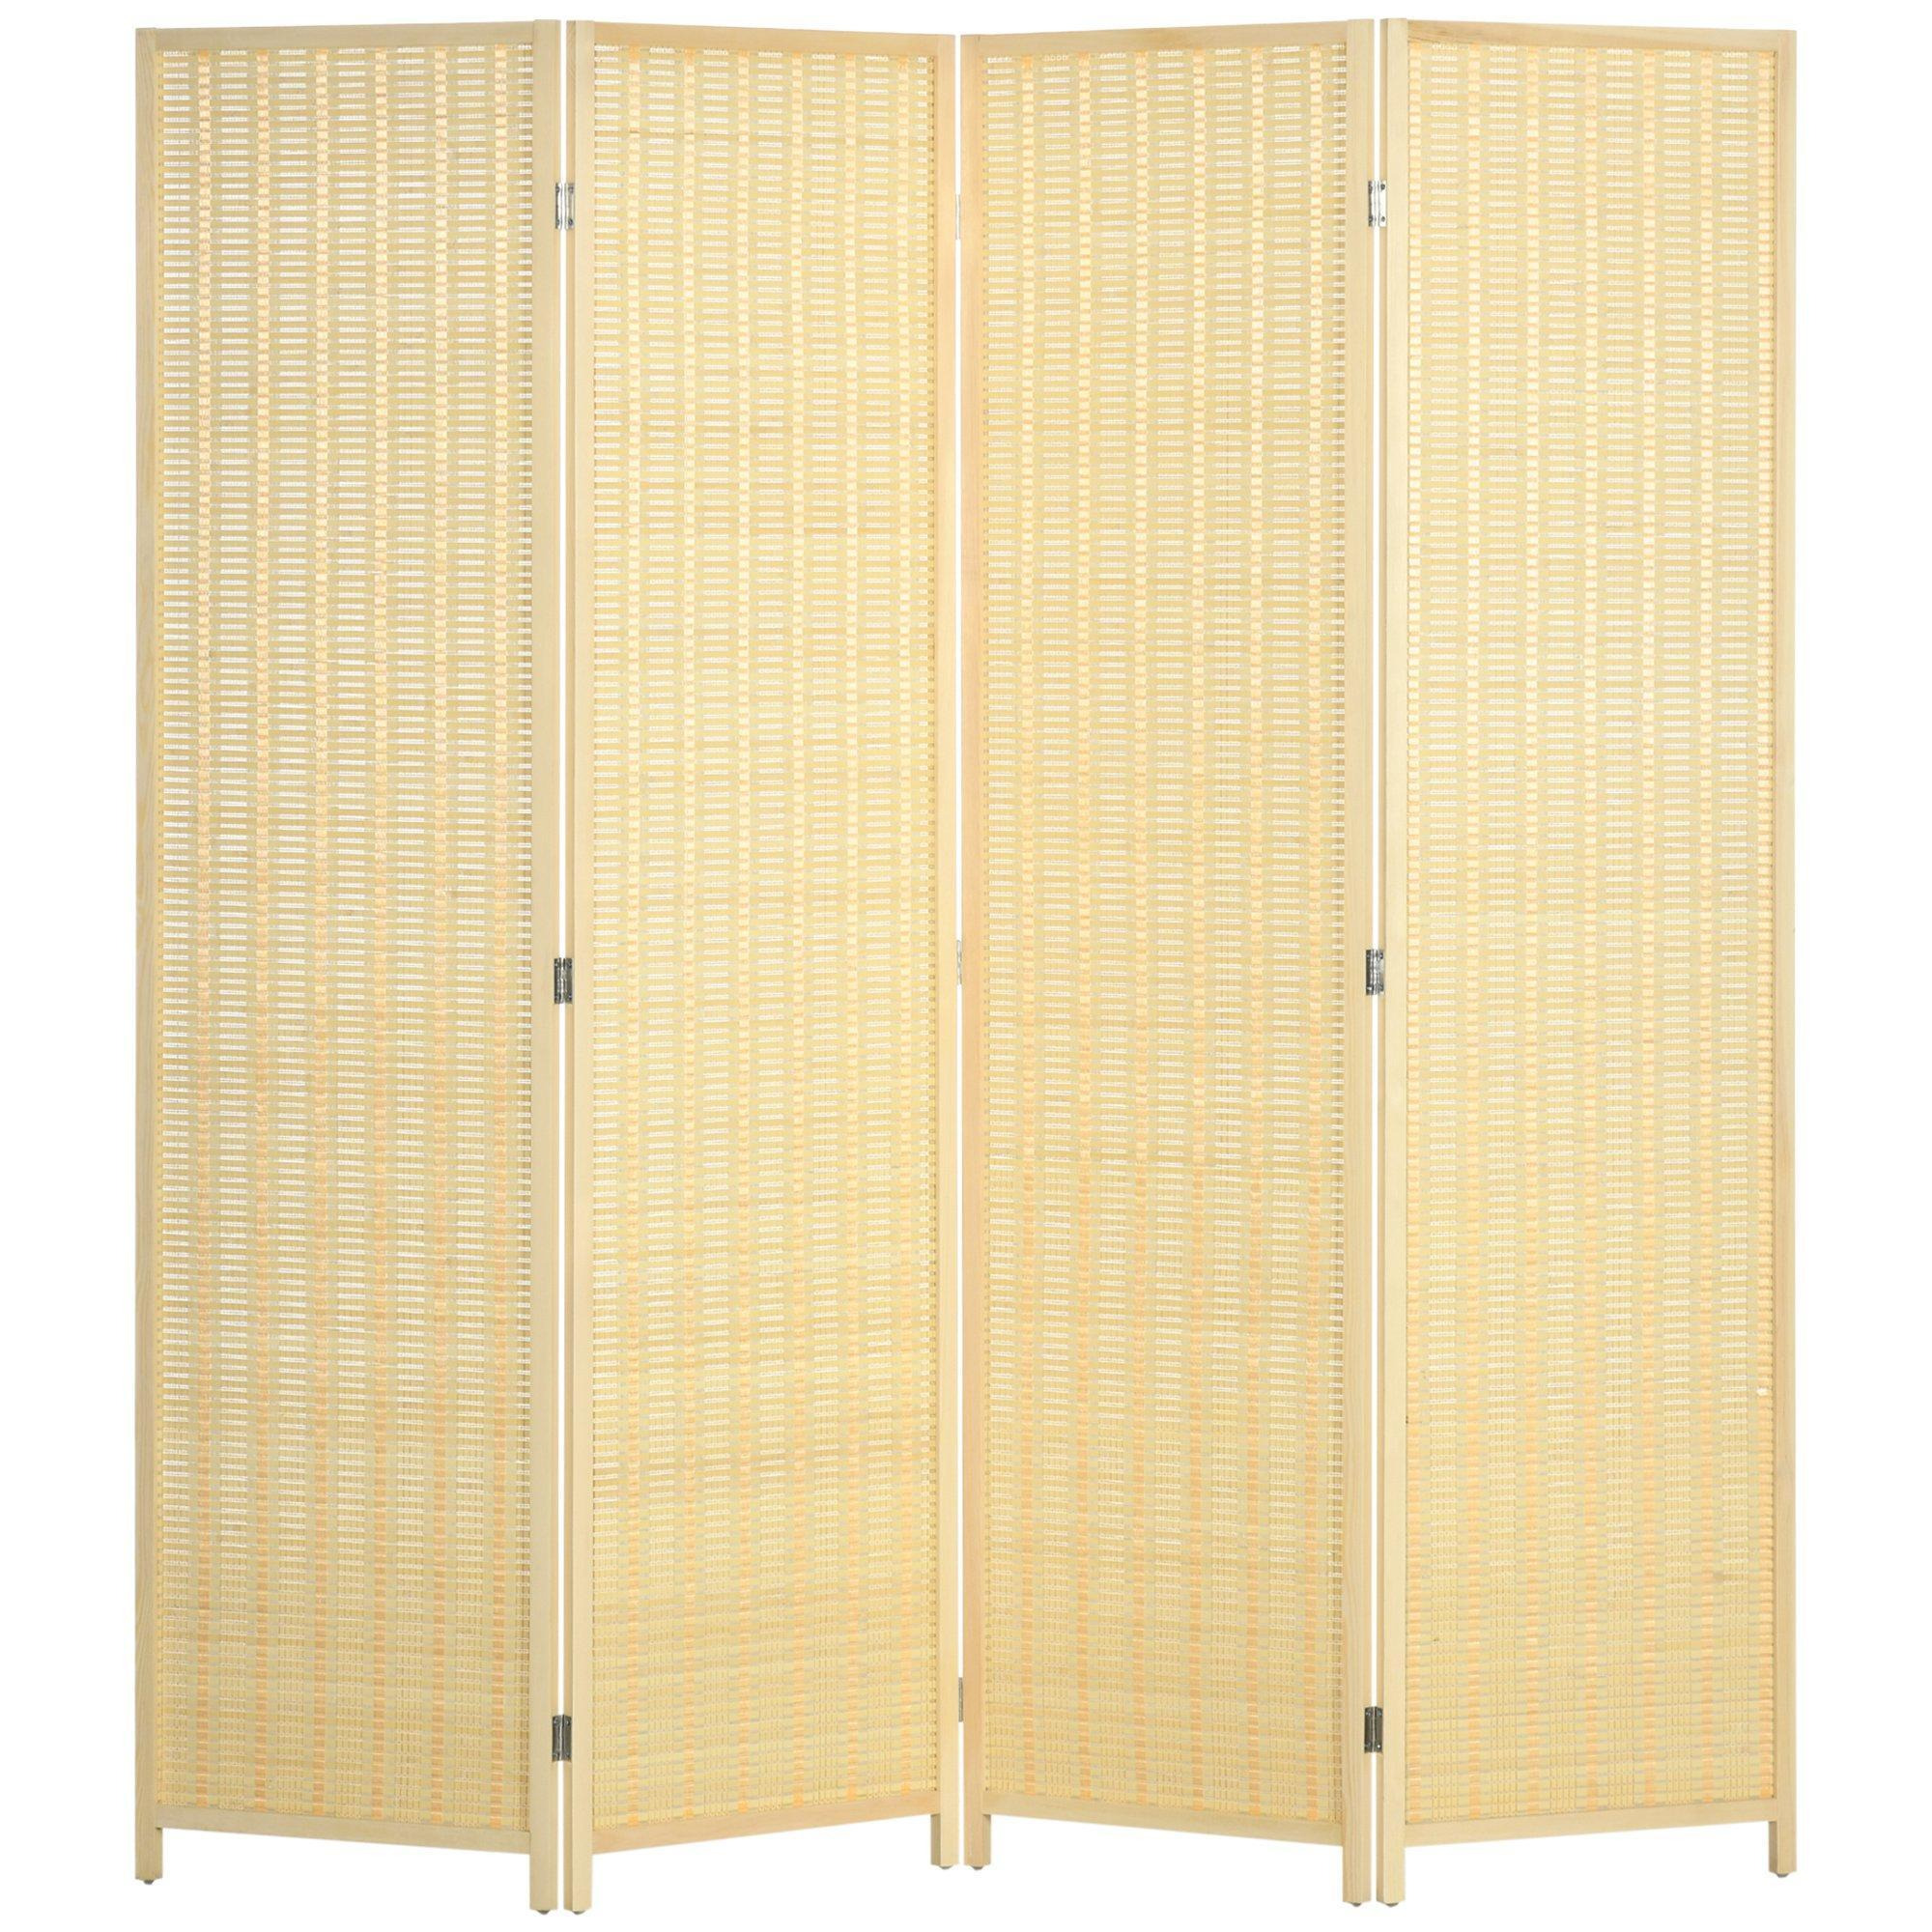 4 Panel Room Divider 170cm Folding Privacy Screen with Pine Wood Frame - image 1